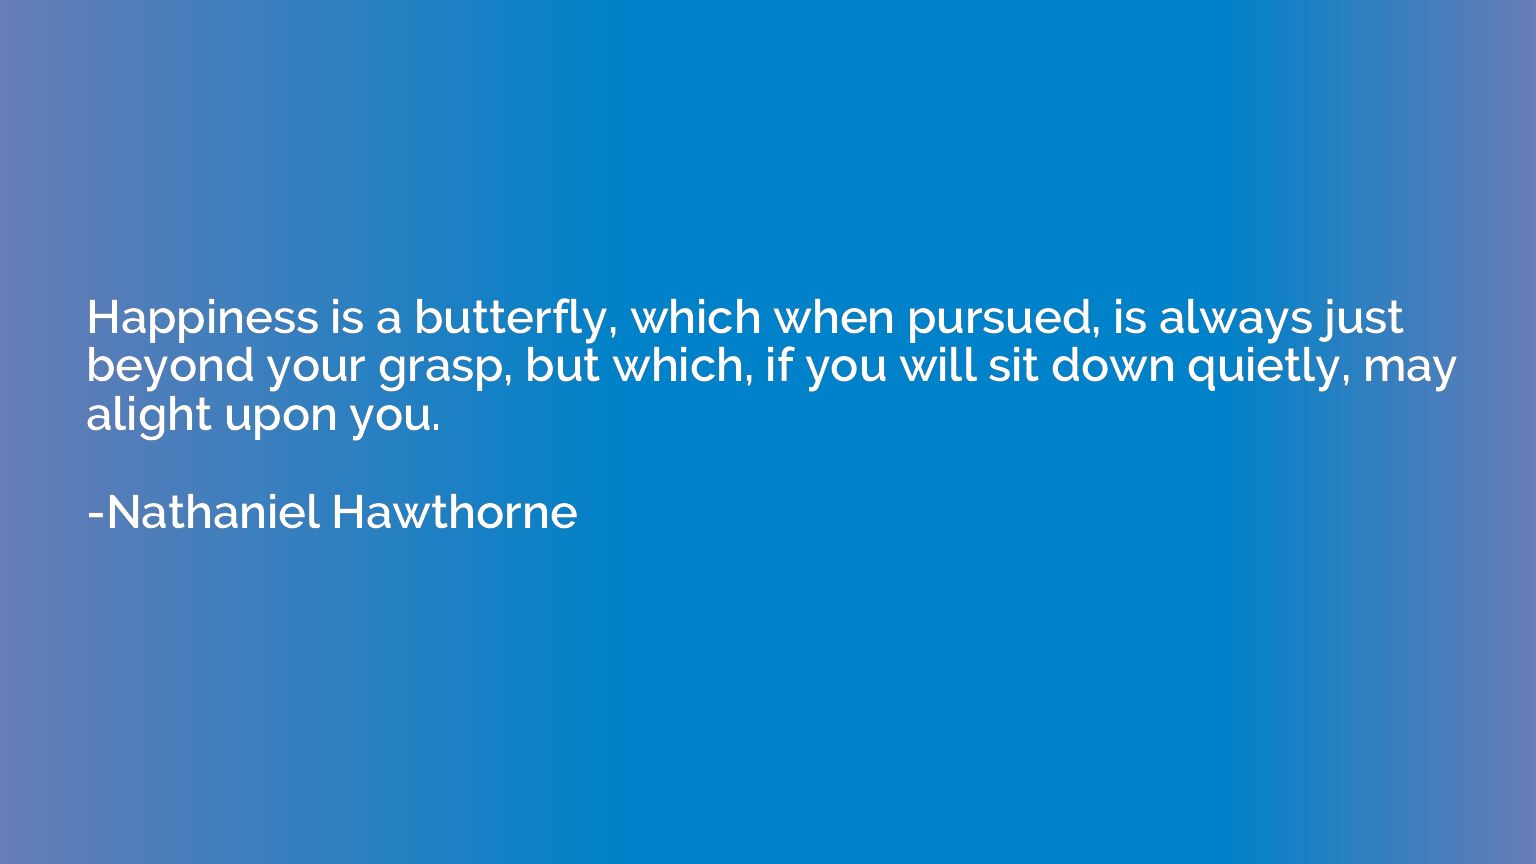 Happiness is a butterfly, which when pursued, is always just